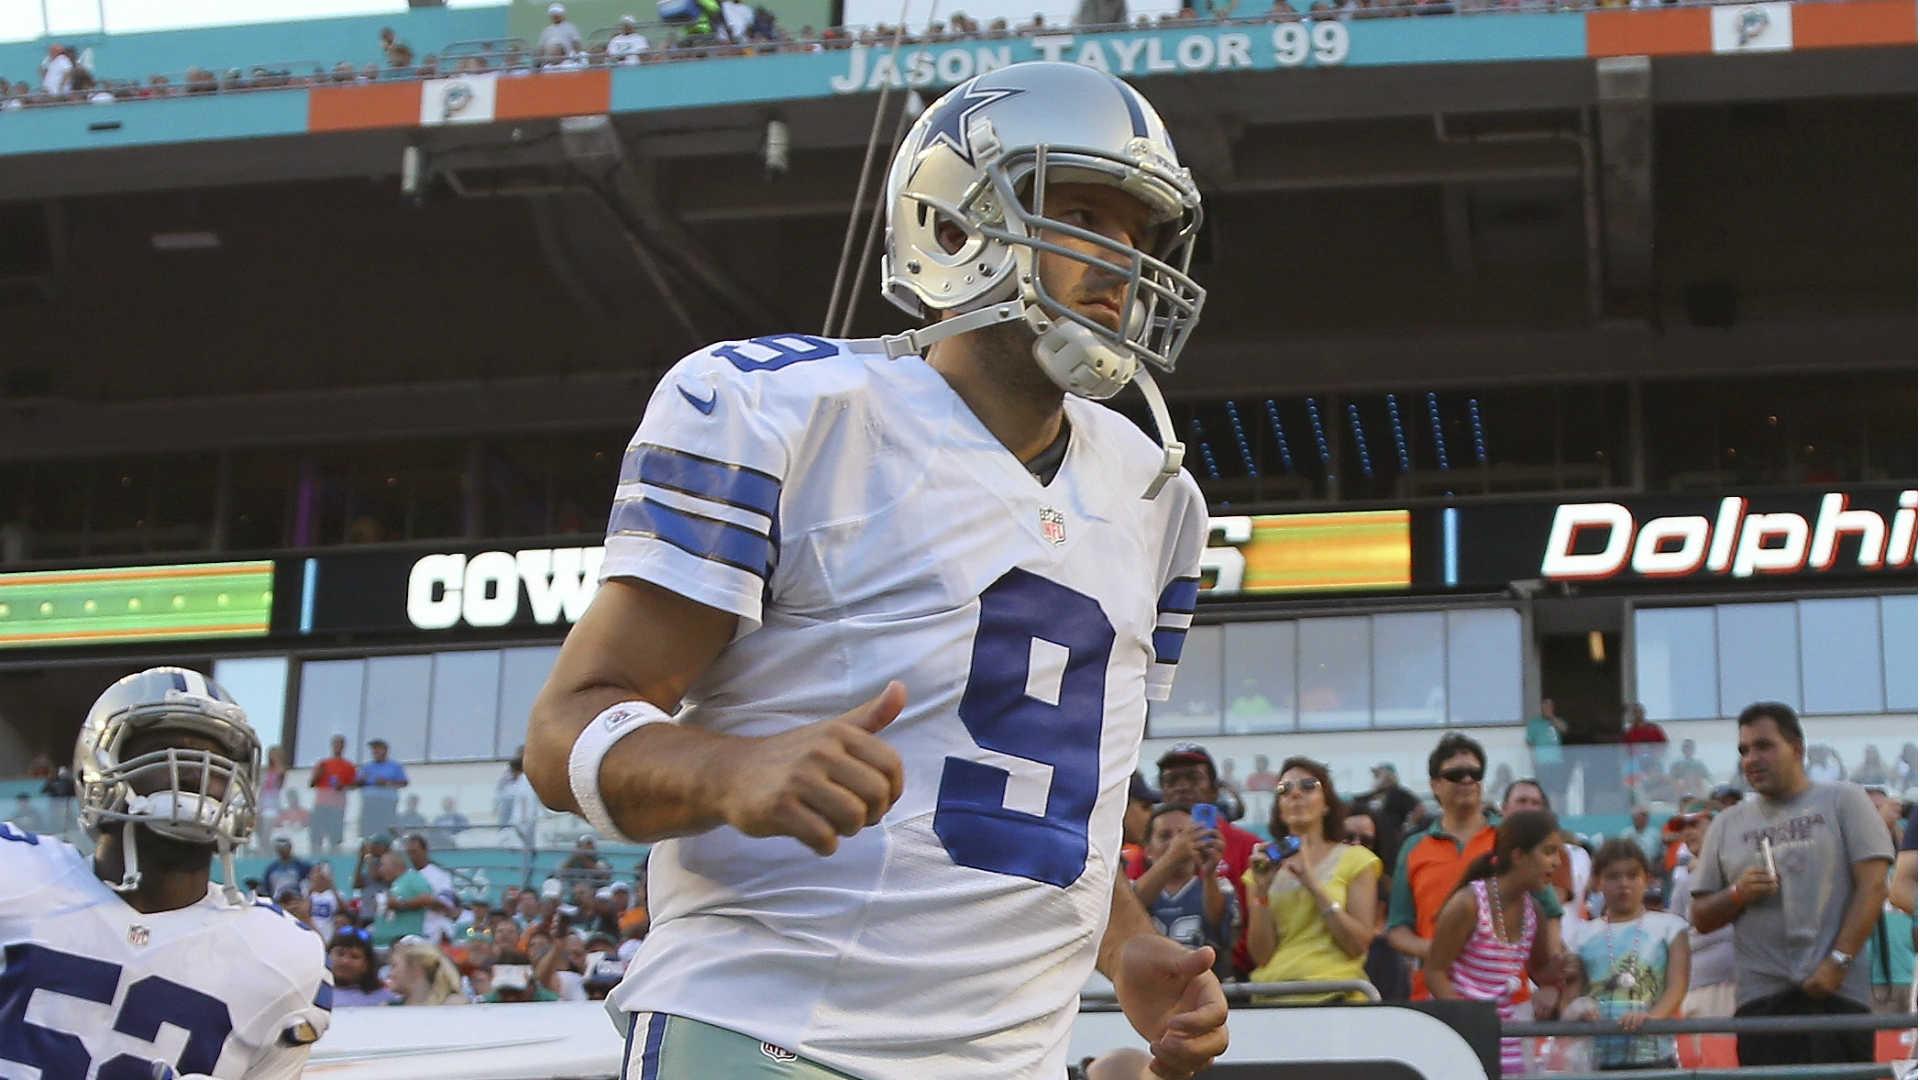 Tony Romo belongs in Pro Football Hall of Fame for Cowboys career